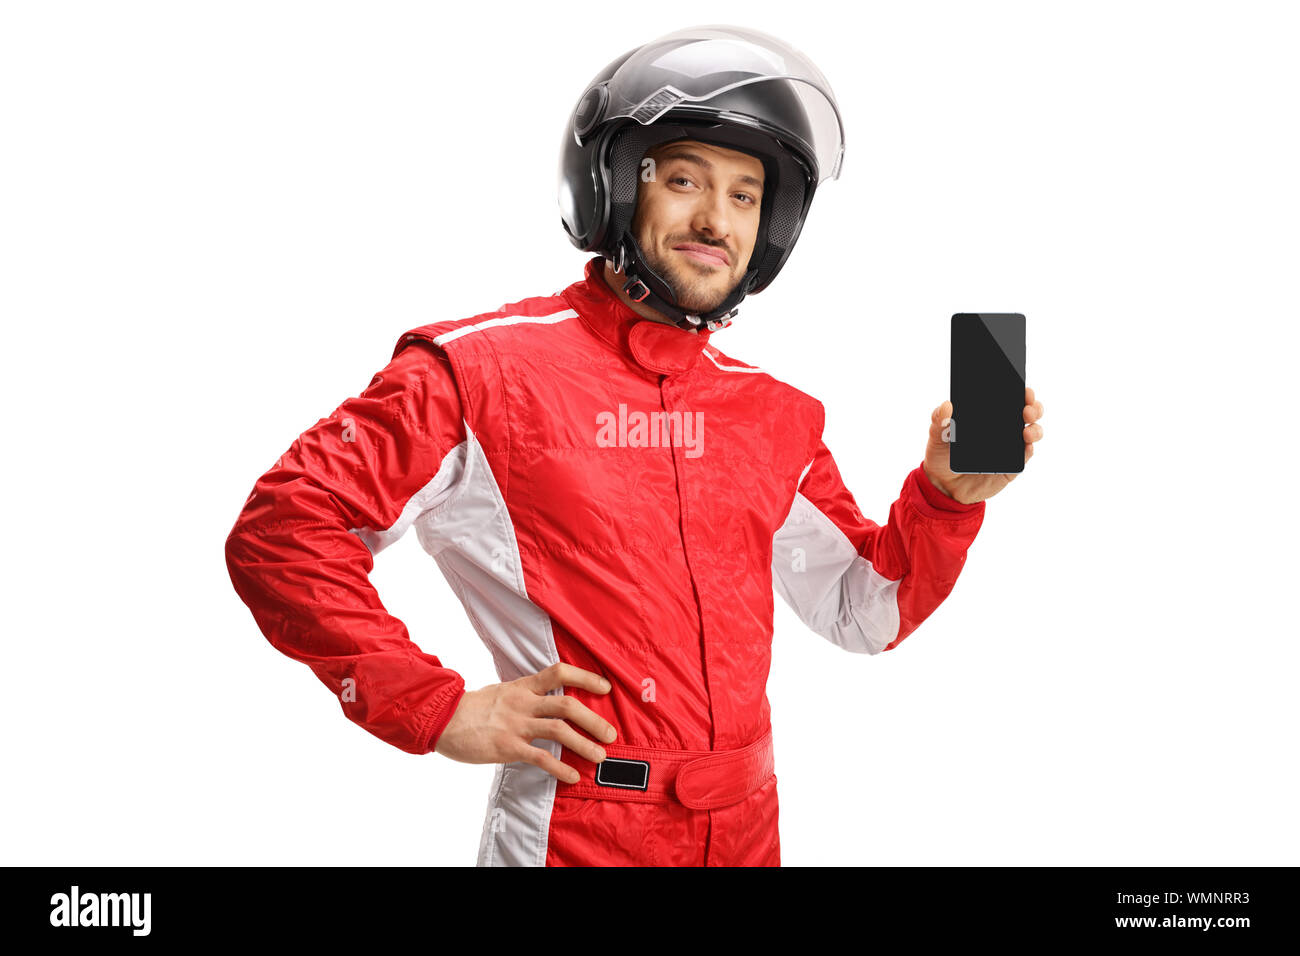 Car racer with a helmet holding a smartphone isolated on white background Stock Photo